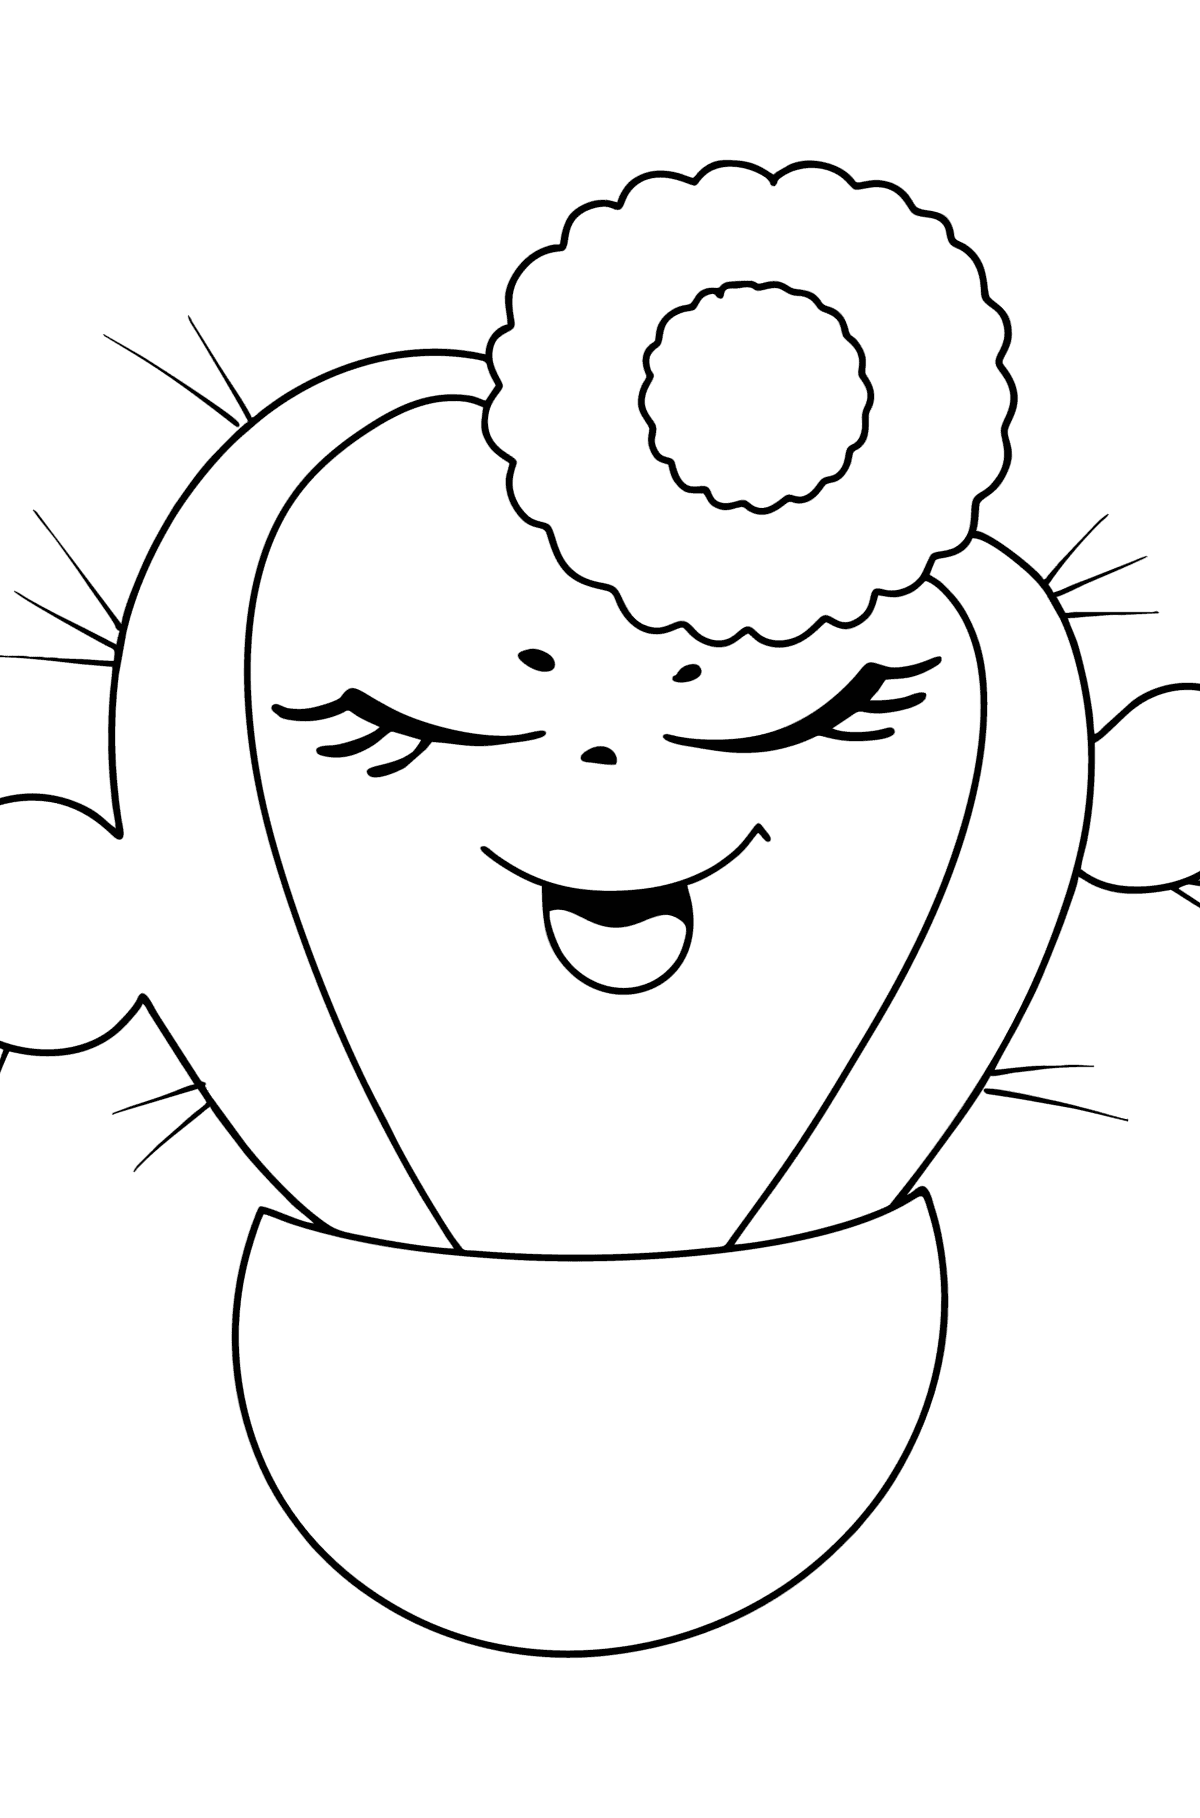 Cactus girl coloring page - Coloring Pages for Kids